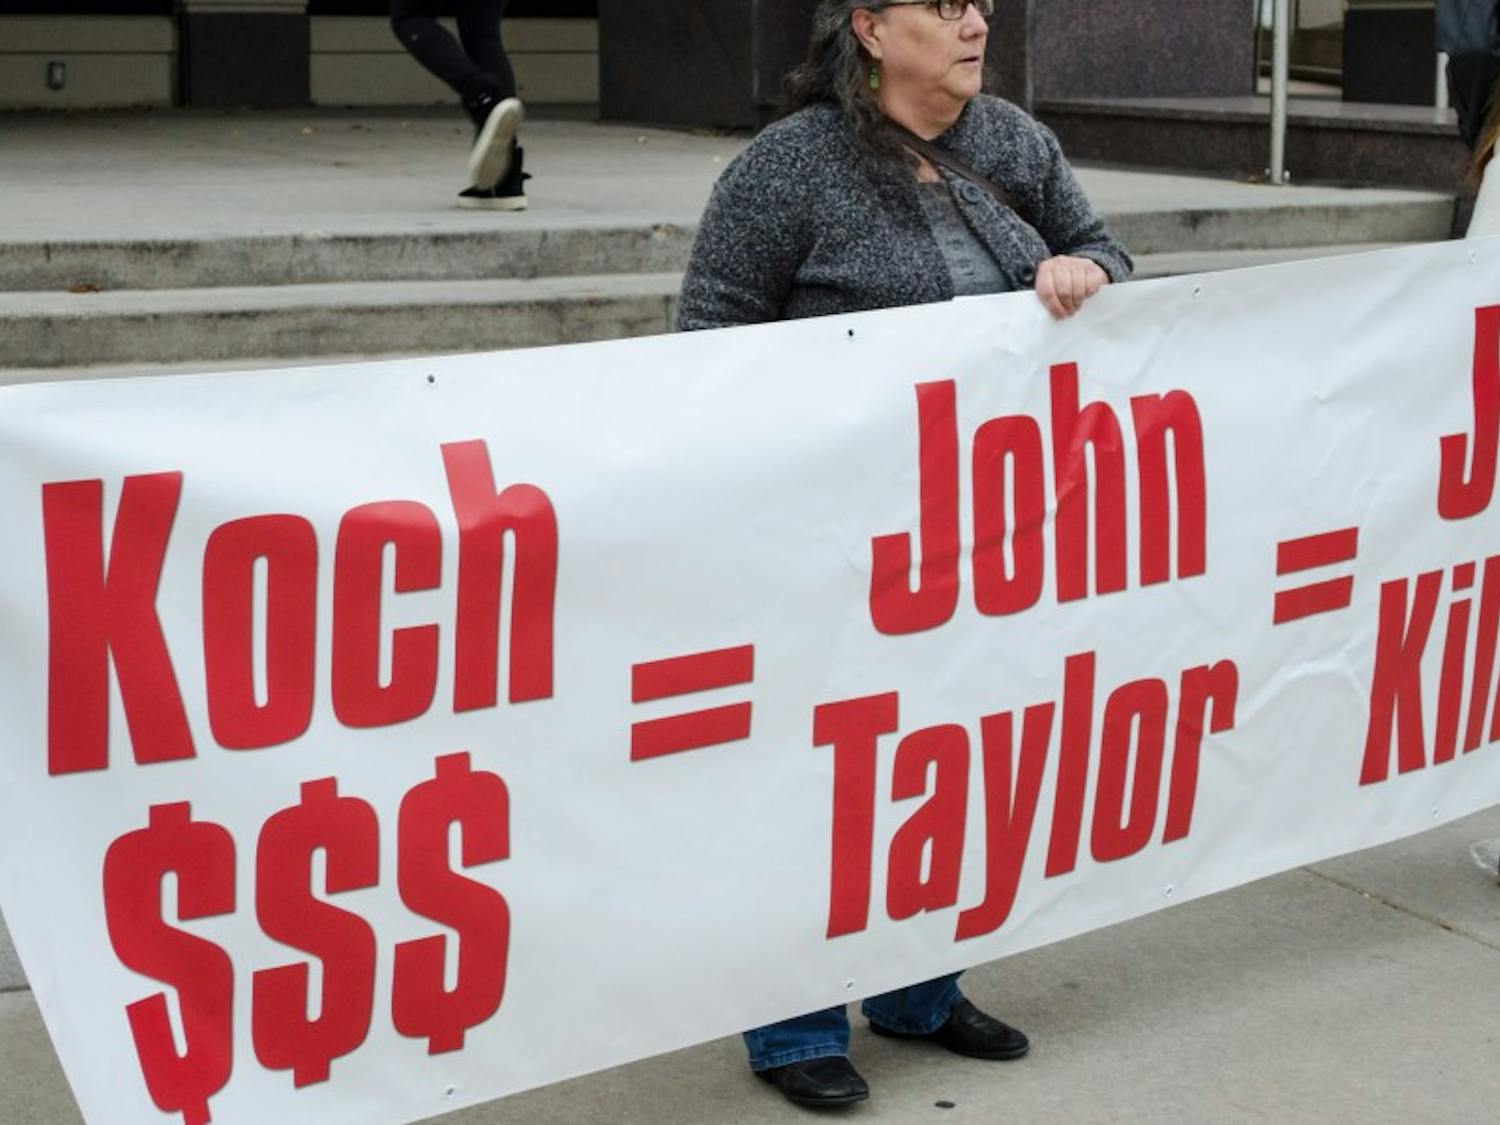 UW-Madison students and community members&nbsp;held a banner denouncing potential Fed Chair nominee John Taylor.